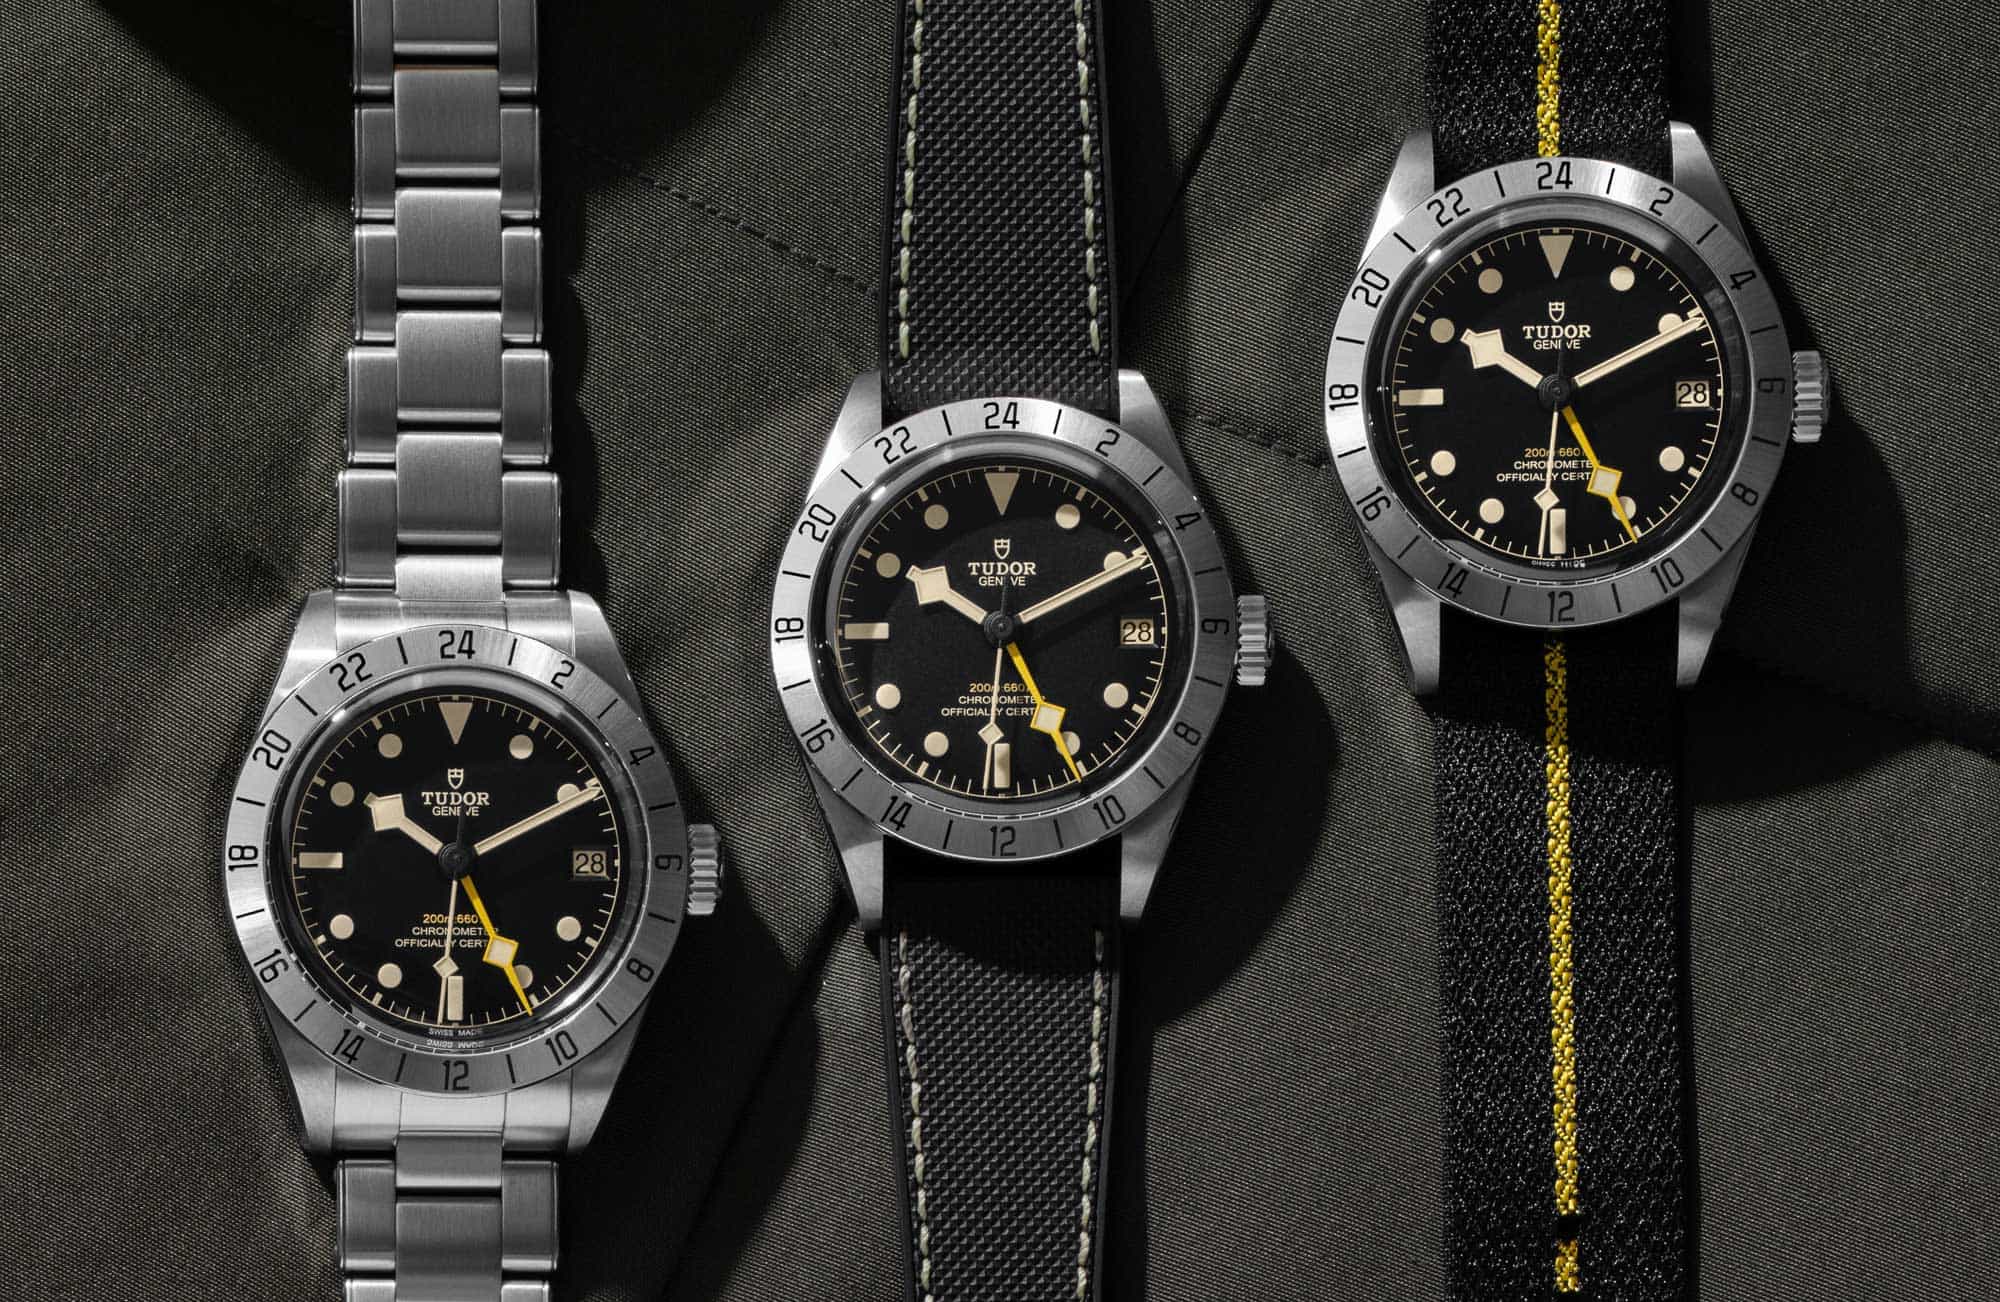 VIDEO] Is the Tudor Black Bay Pro the 39mm GMT of Your Dreams? - Worn &  Wound